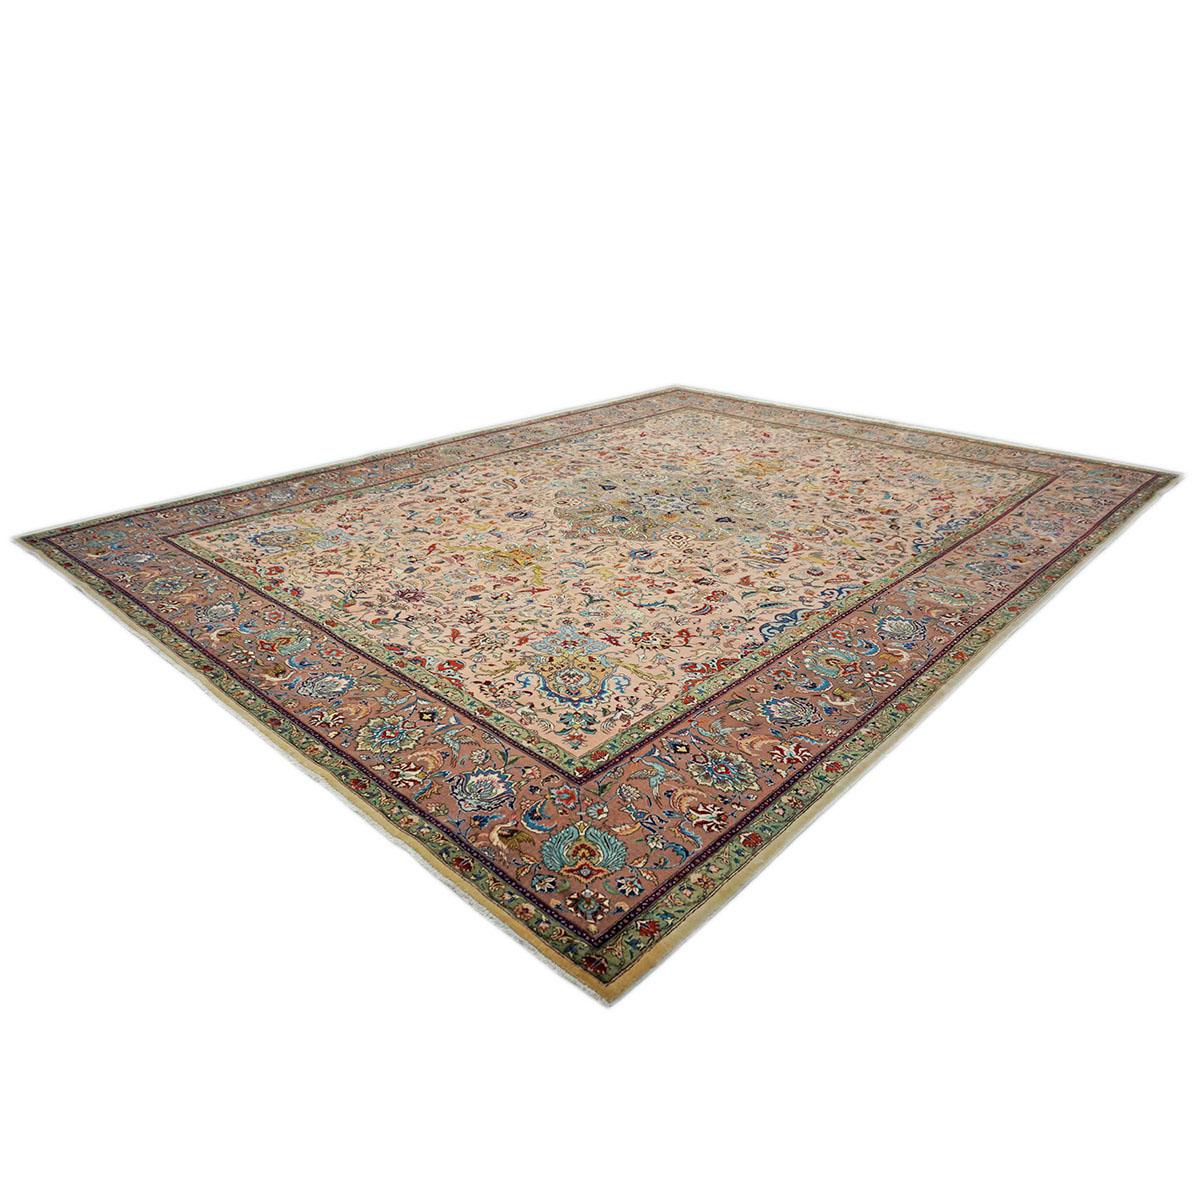 Antique 1930s Persian Tabriz Pahlavi 9X13 Salmon Pink & Nutmeg Brown Area Rug In Good Condition For Sale In Houston, TX